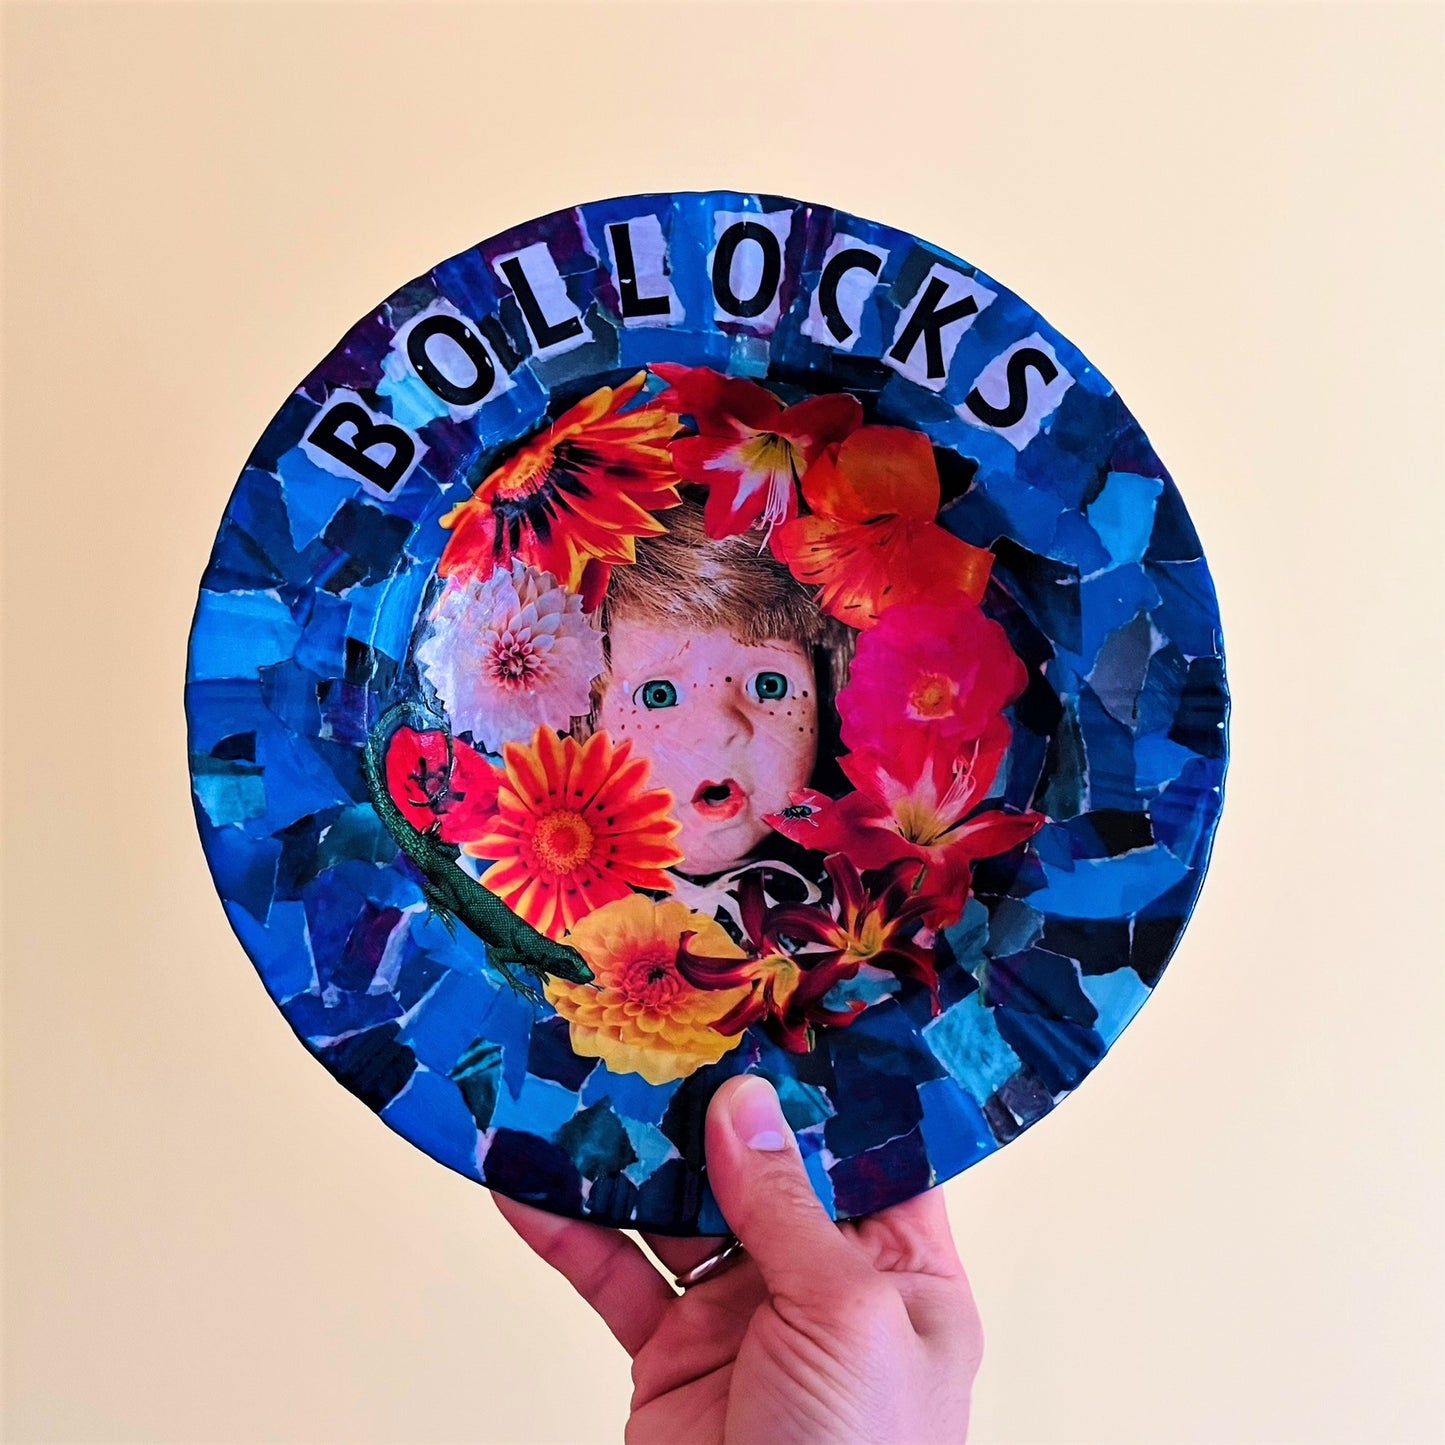 "Bollocks" Wall Plate by House of Frisson, featuring a collage of a vintage male doll surrounded by flowers and a lizard, on a blue background. Holding plate.